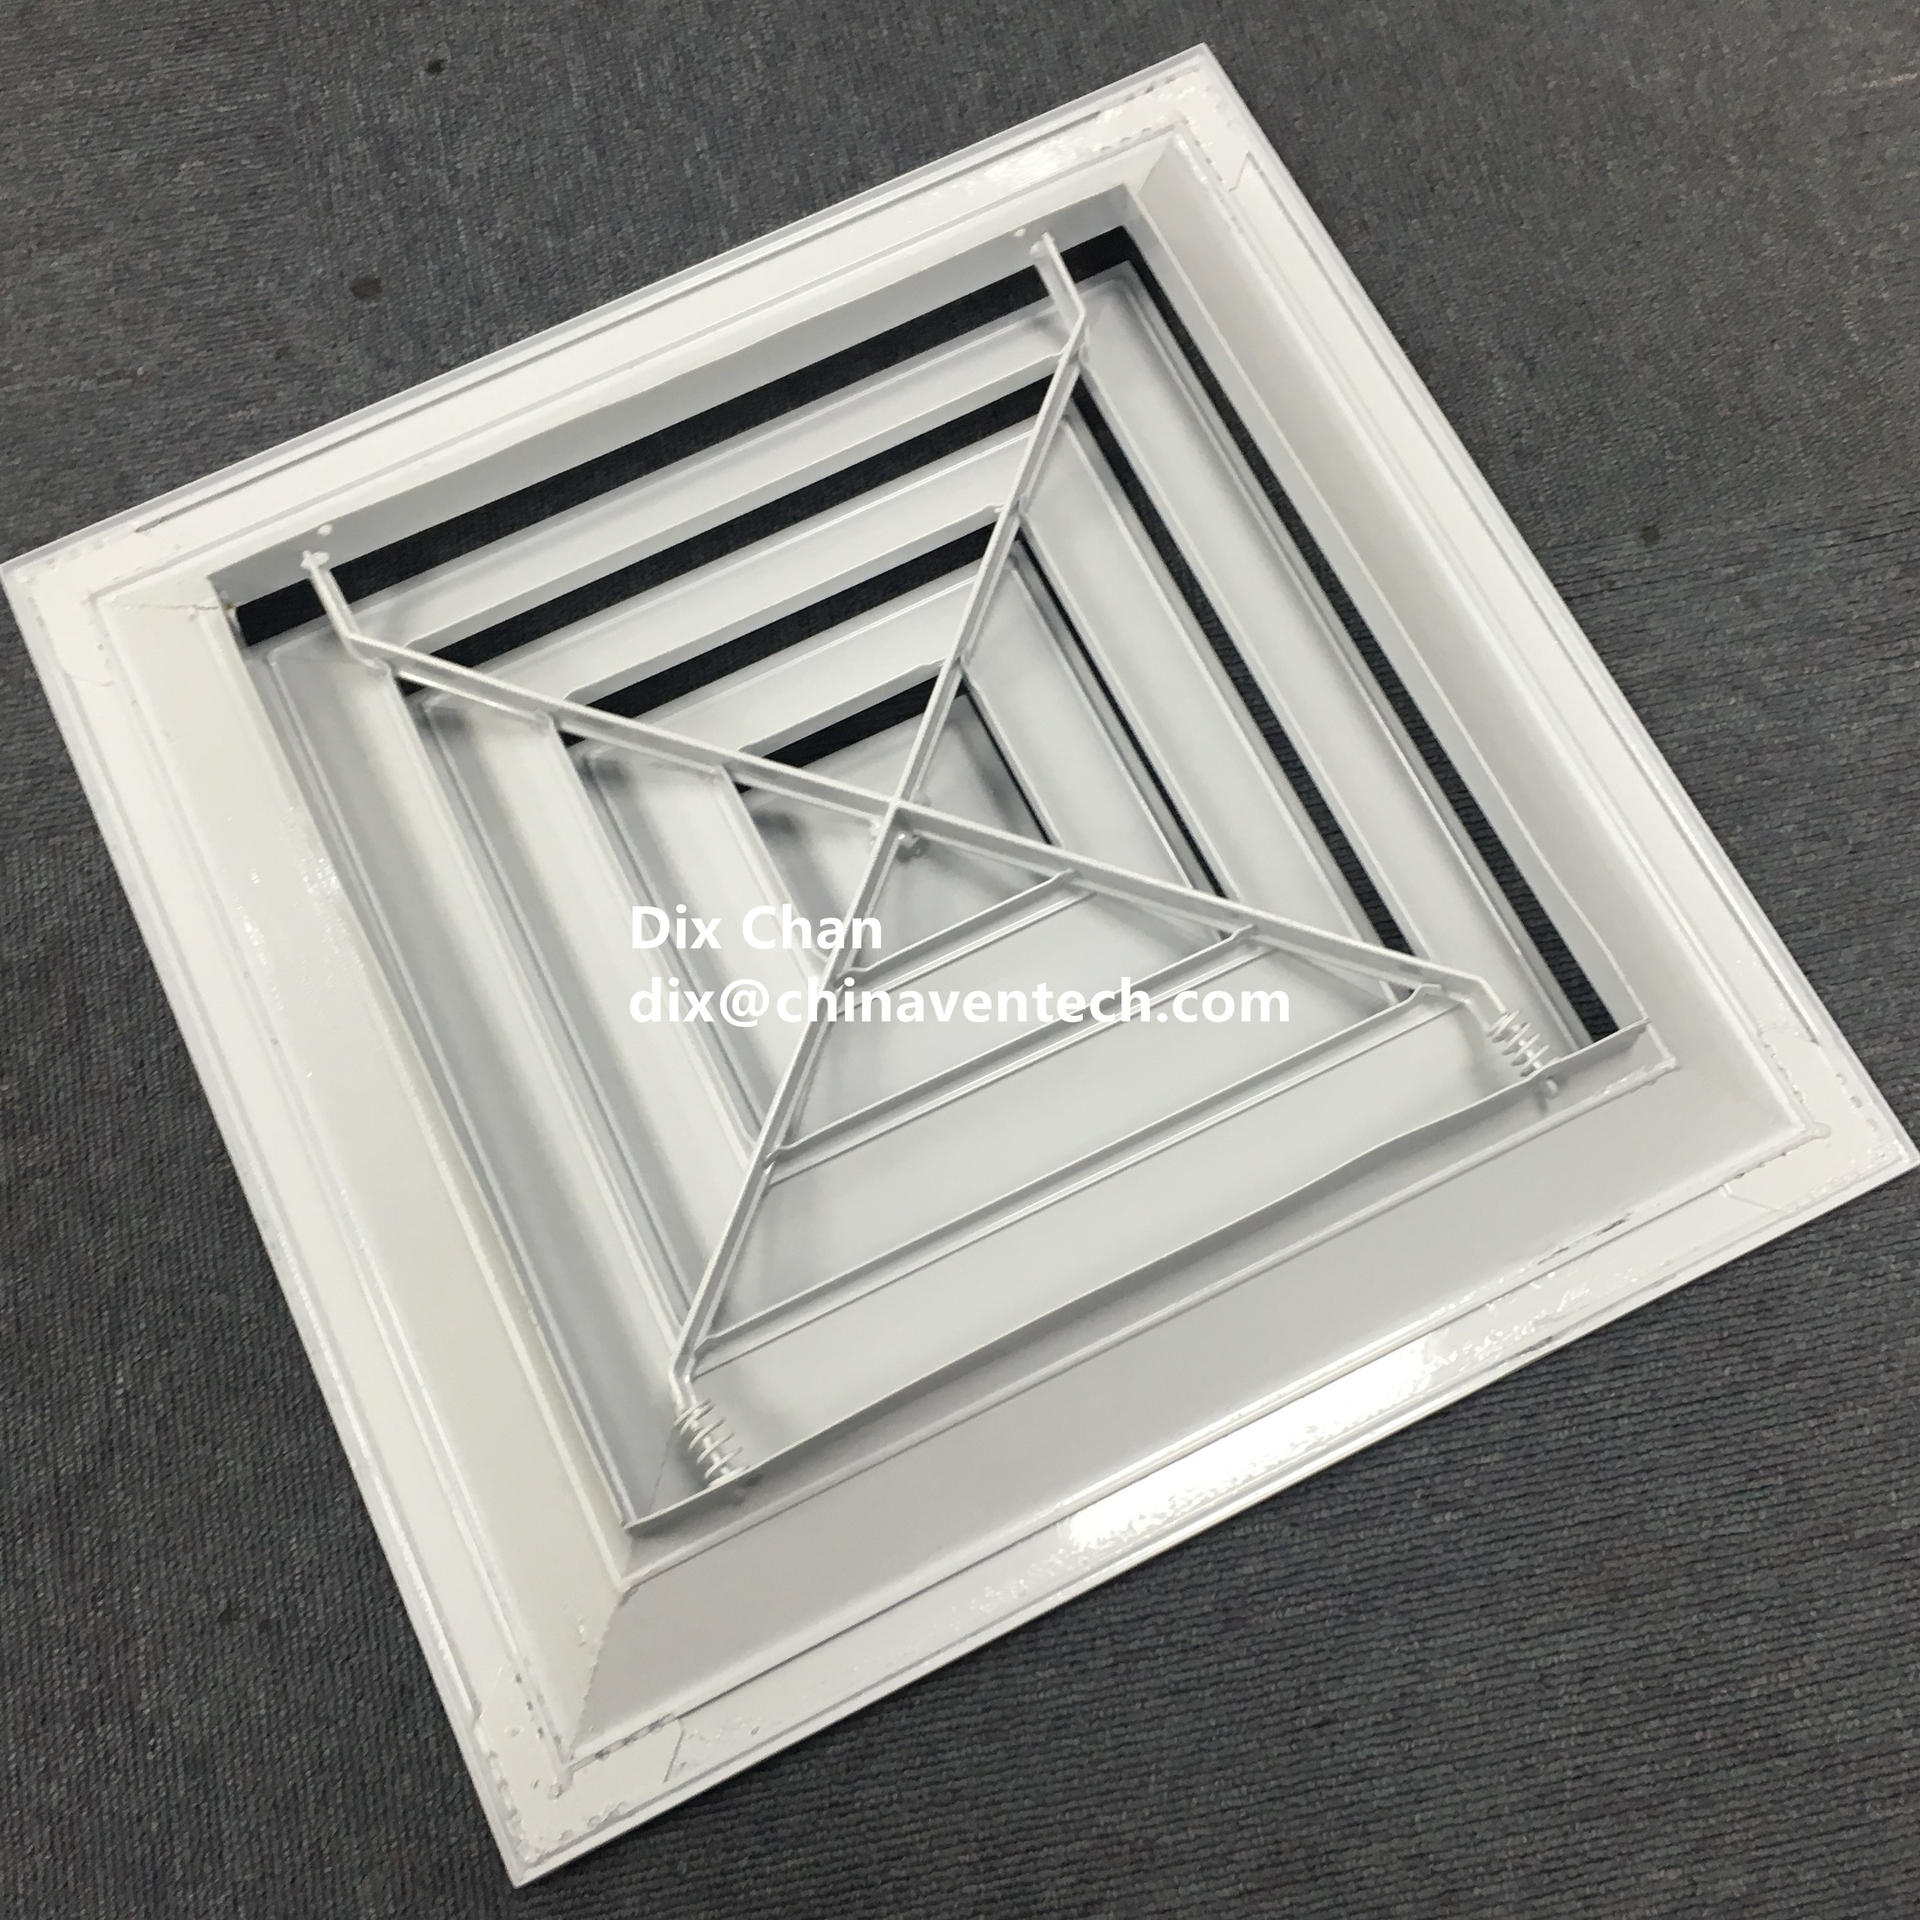 Hvac air diffusion products high quality durable X construction ceiling return air ventilation square 4 way diffuser